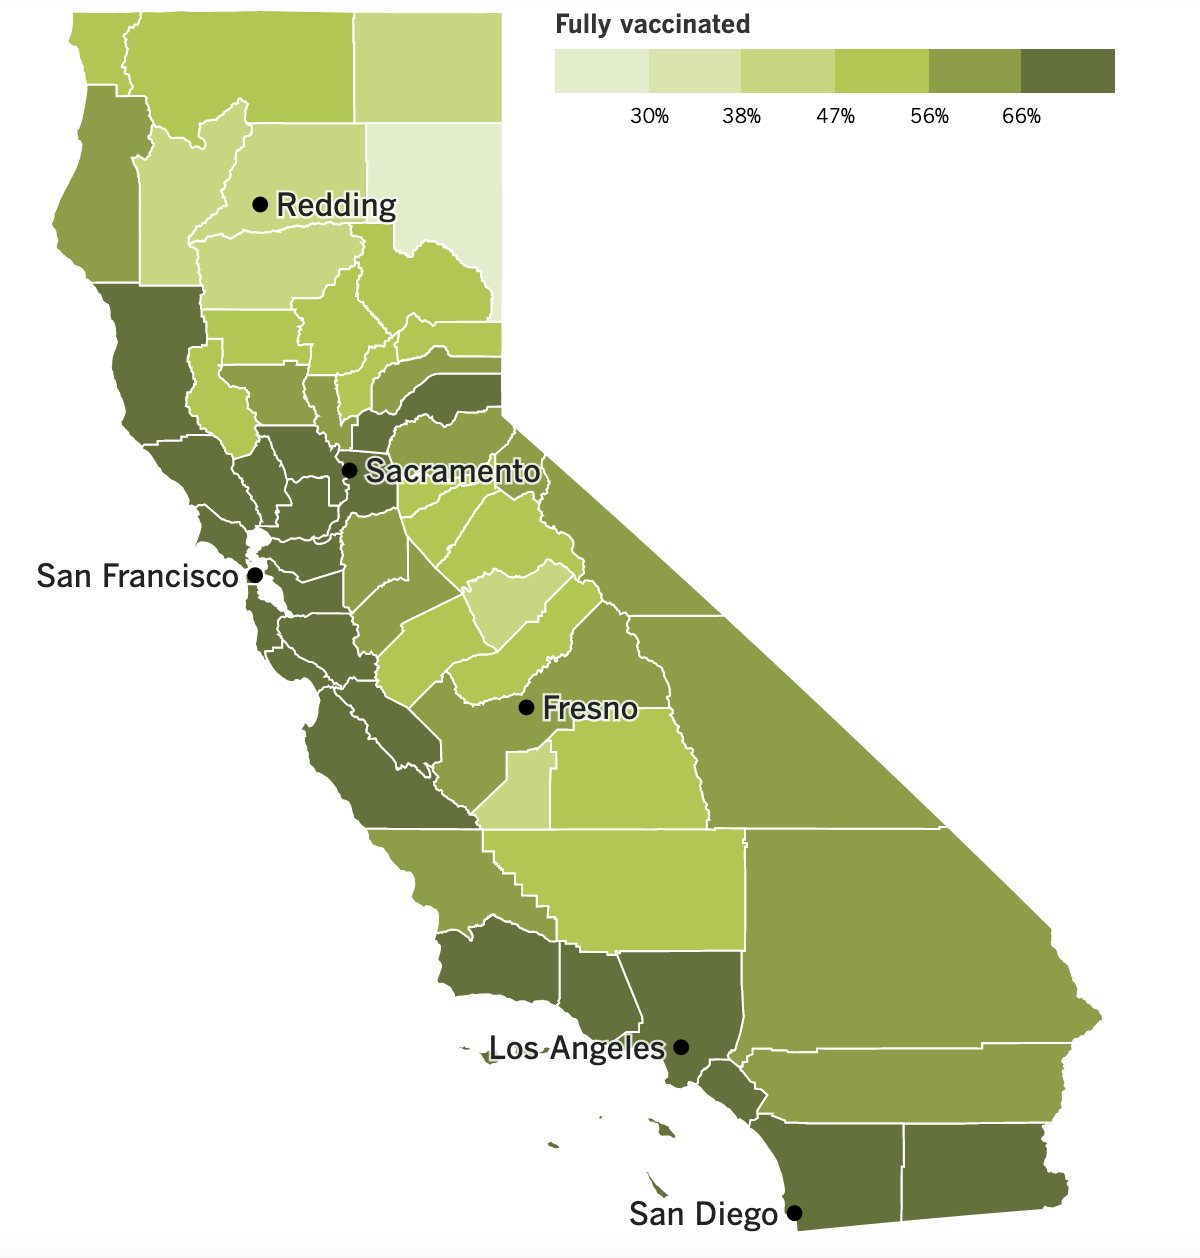 A map showing California's COVID-19 vaccination progress by county as of March 8, 2022.